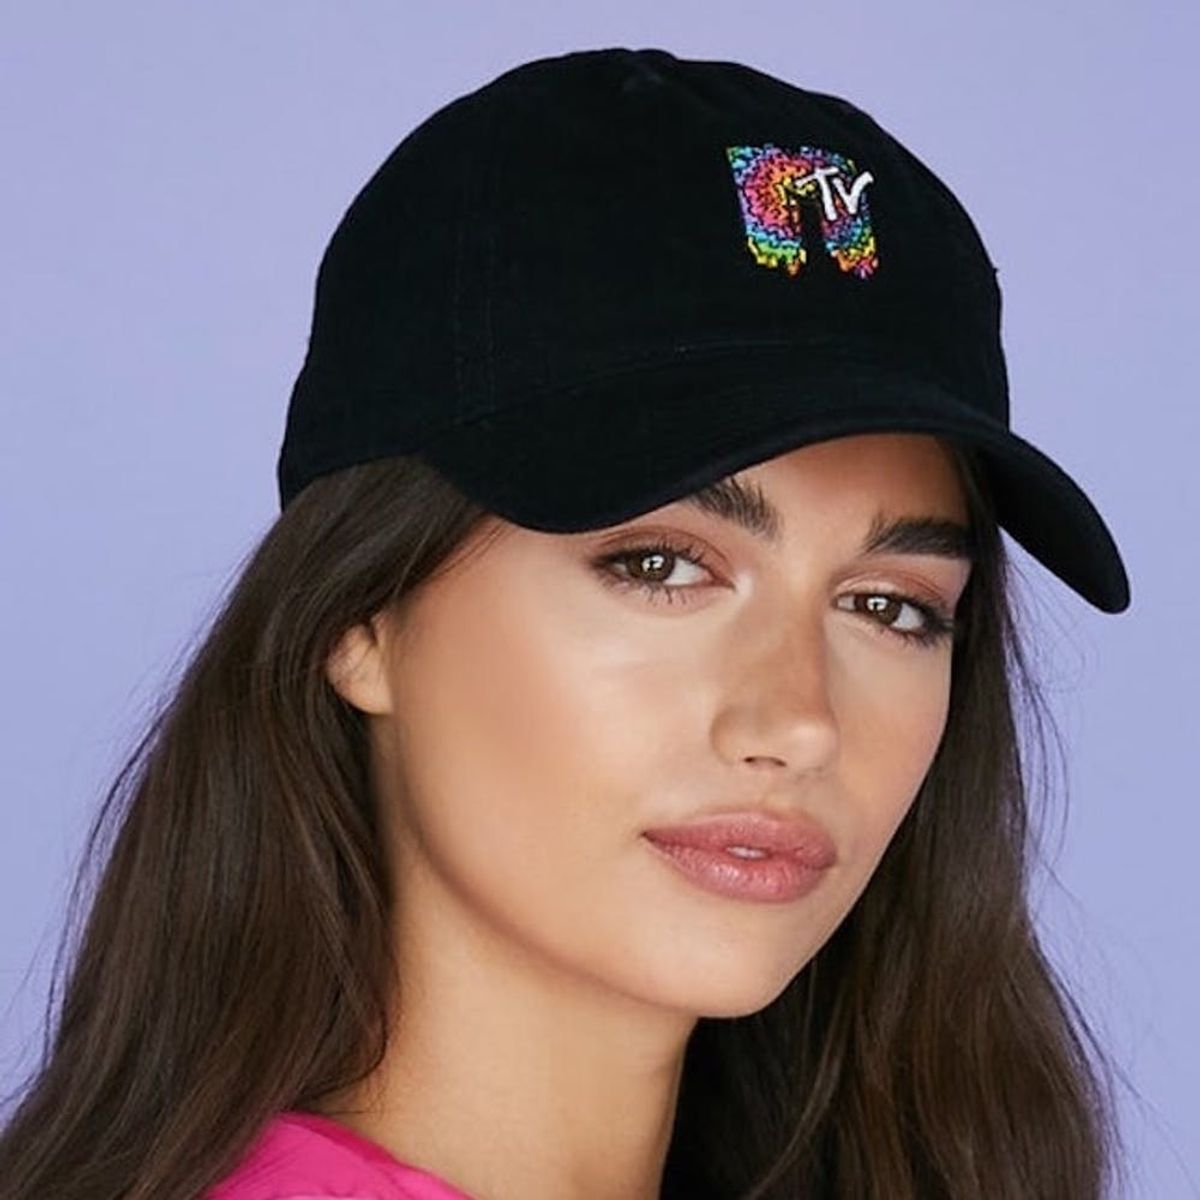 Forever 21 Is Launching the Retro MTV Line of Your ’90s Dreams